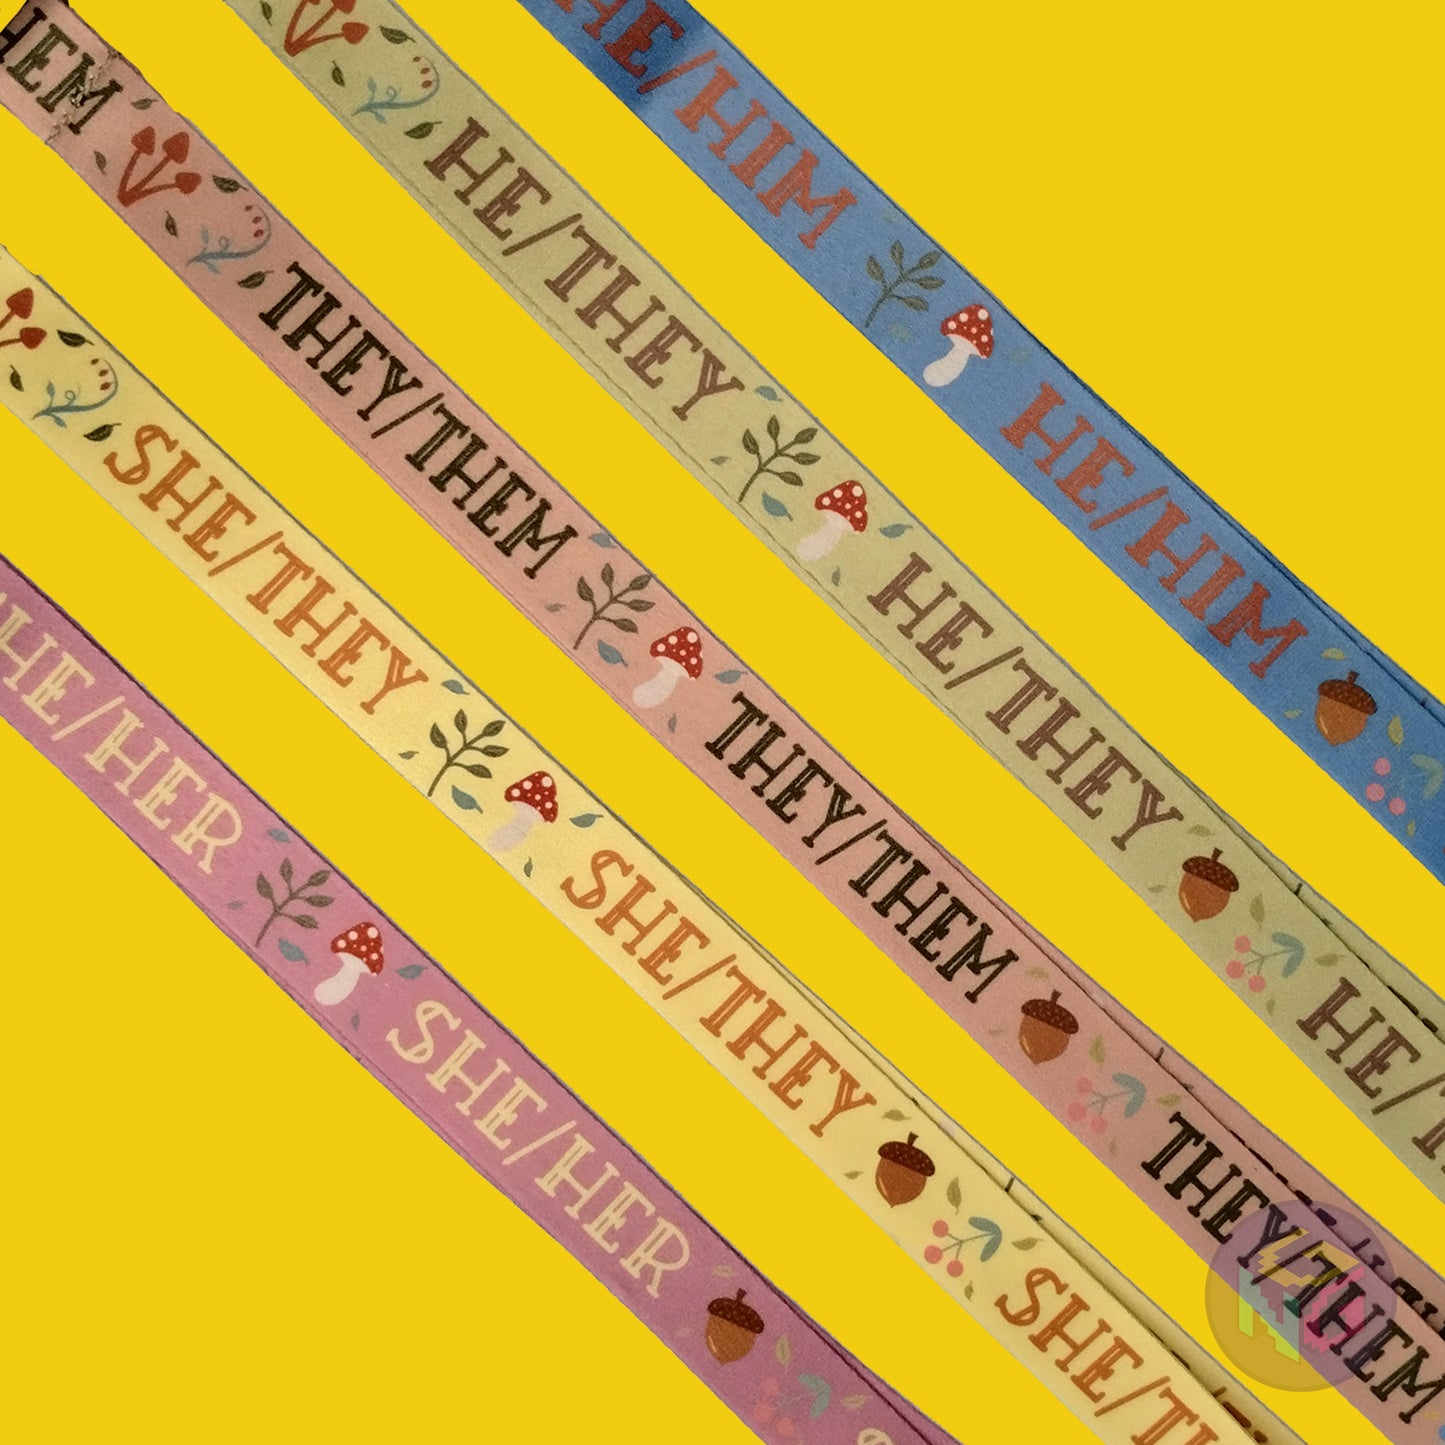 group shot of all five of the cottagecore pronoun lanyards showing the options for he him, he they, they them, she they, and she her